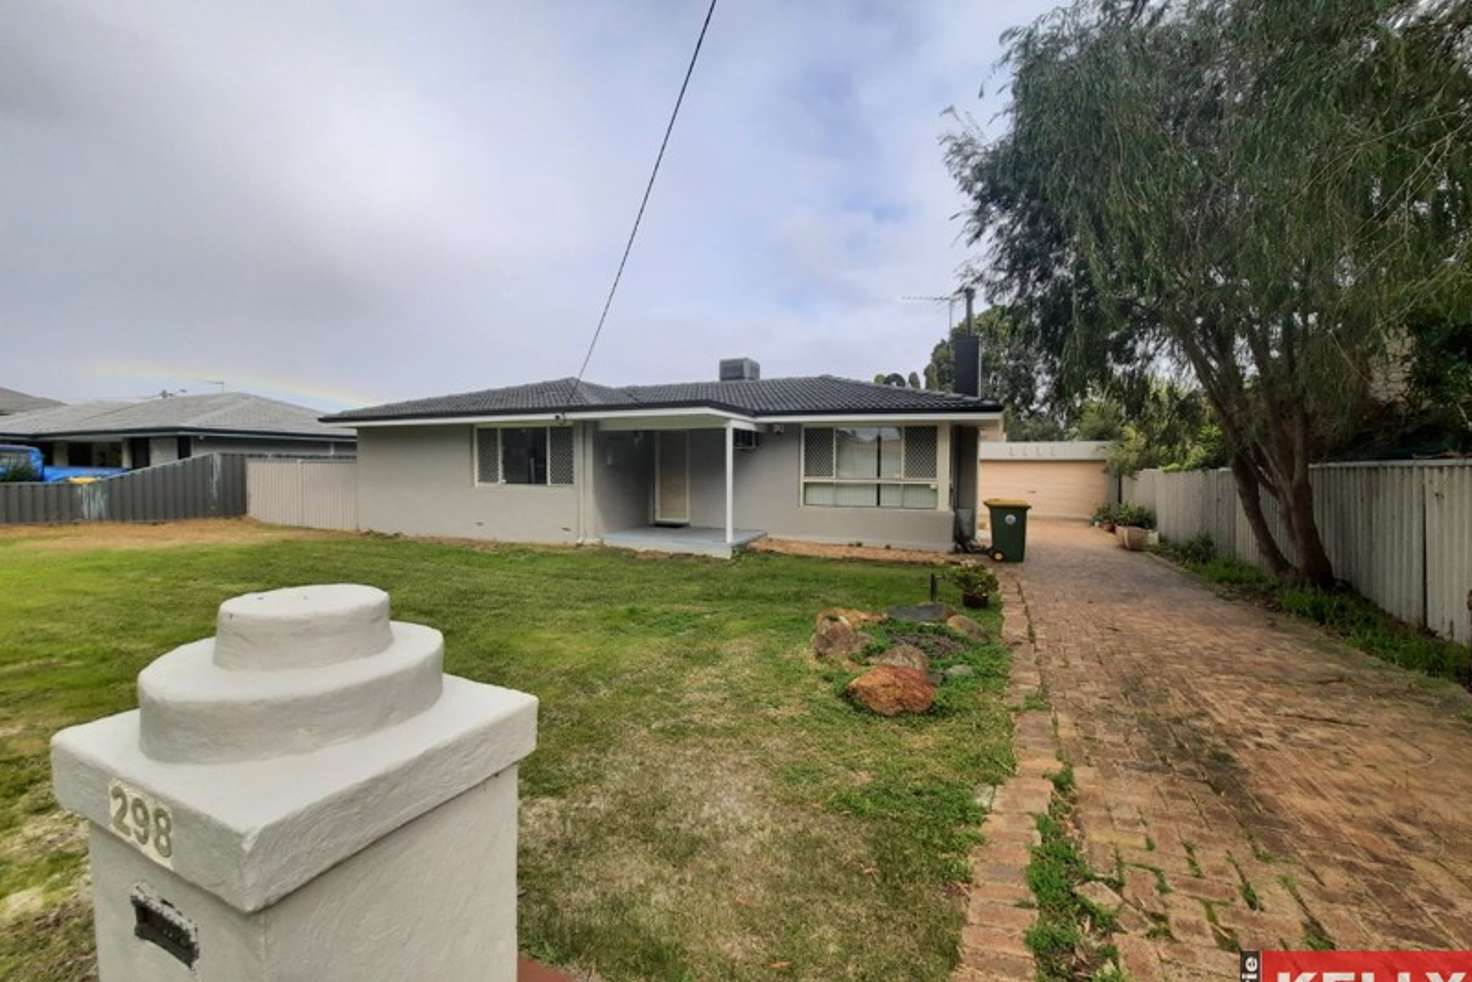 Main view of Homely house listing, 298 Acton avenue, Kewdale WA 6105